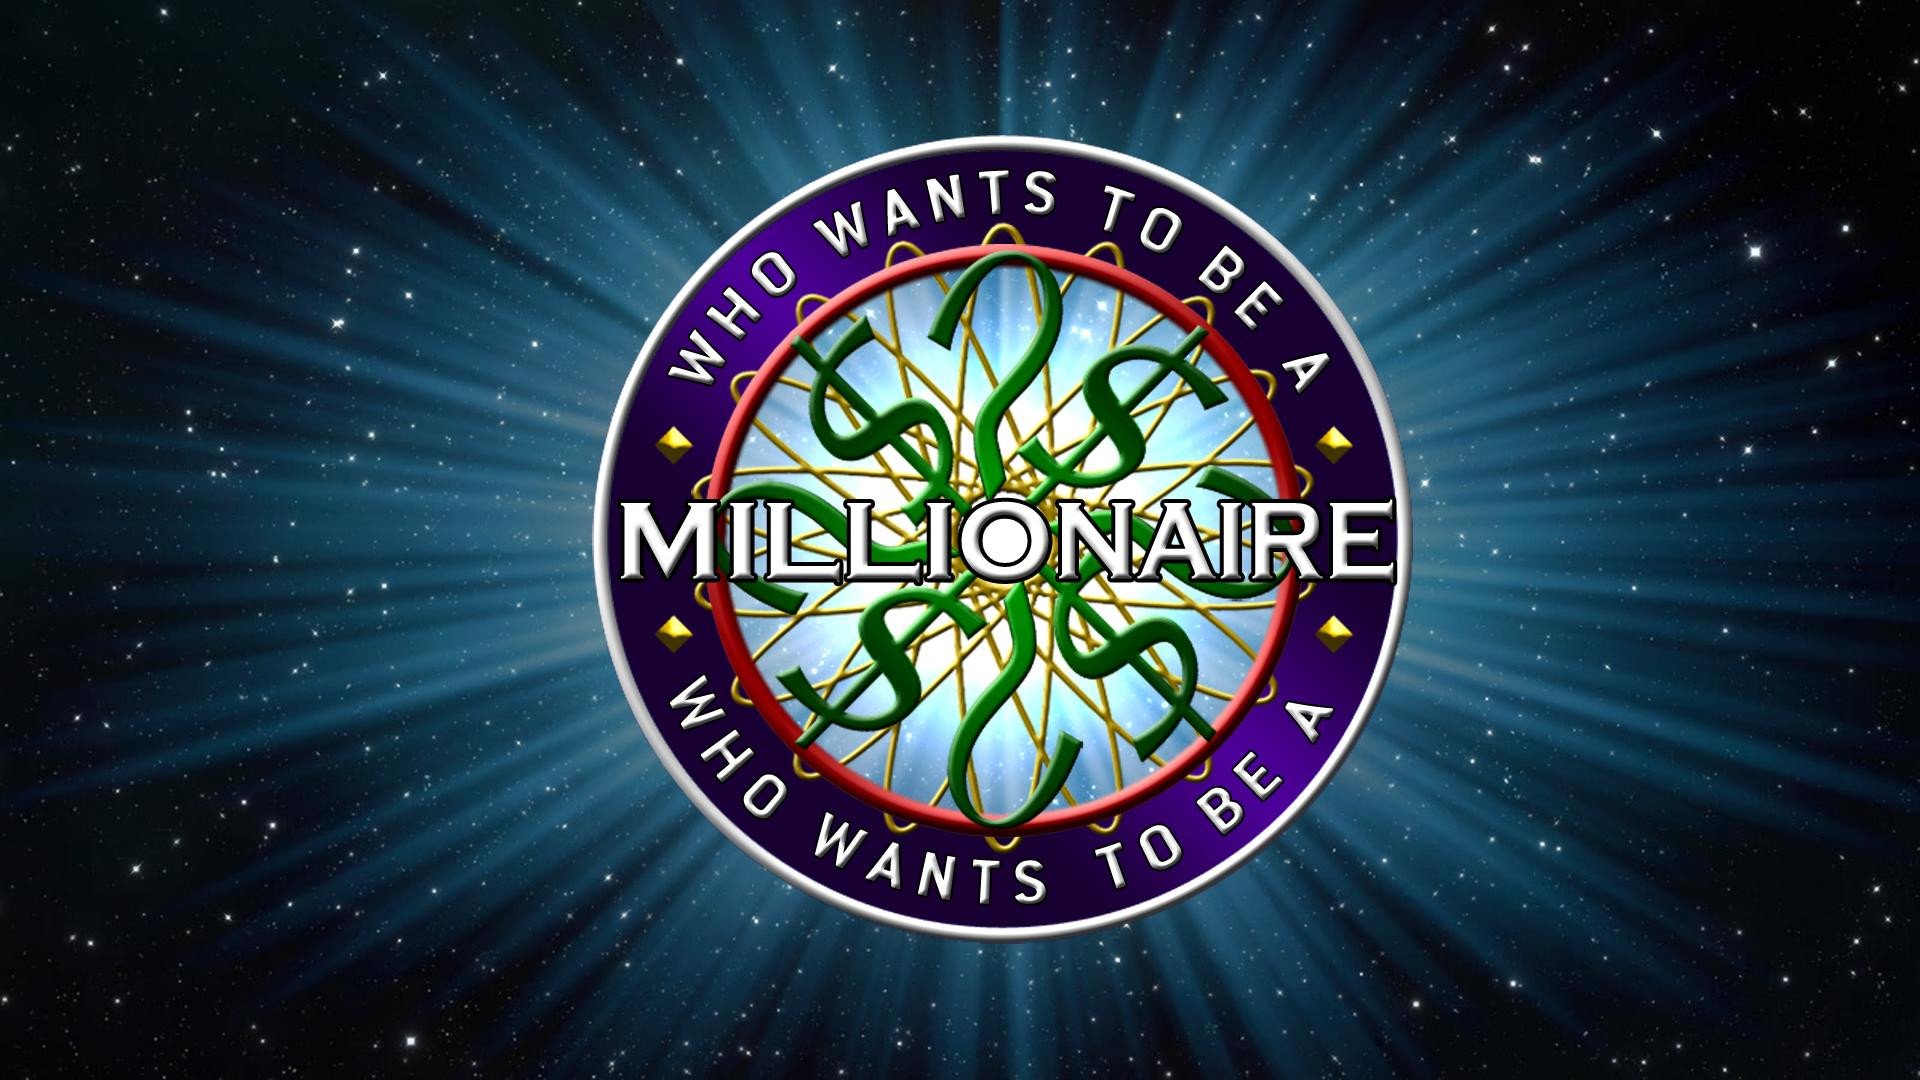 Who Wants to be a Millionaire HD Wallpapers Achtergronden